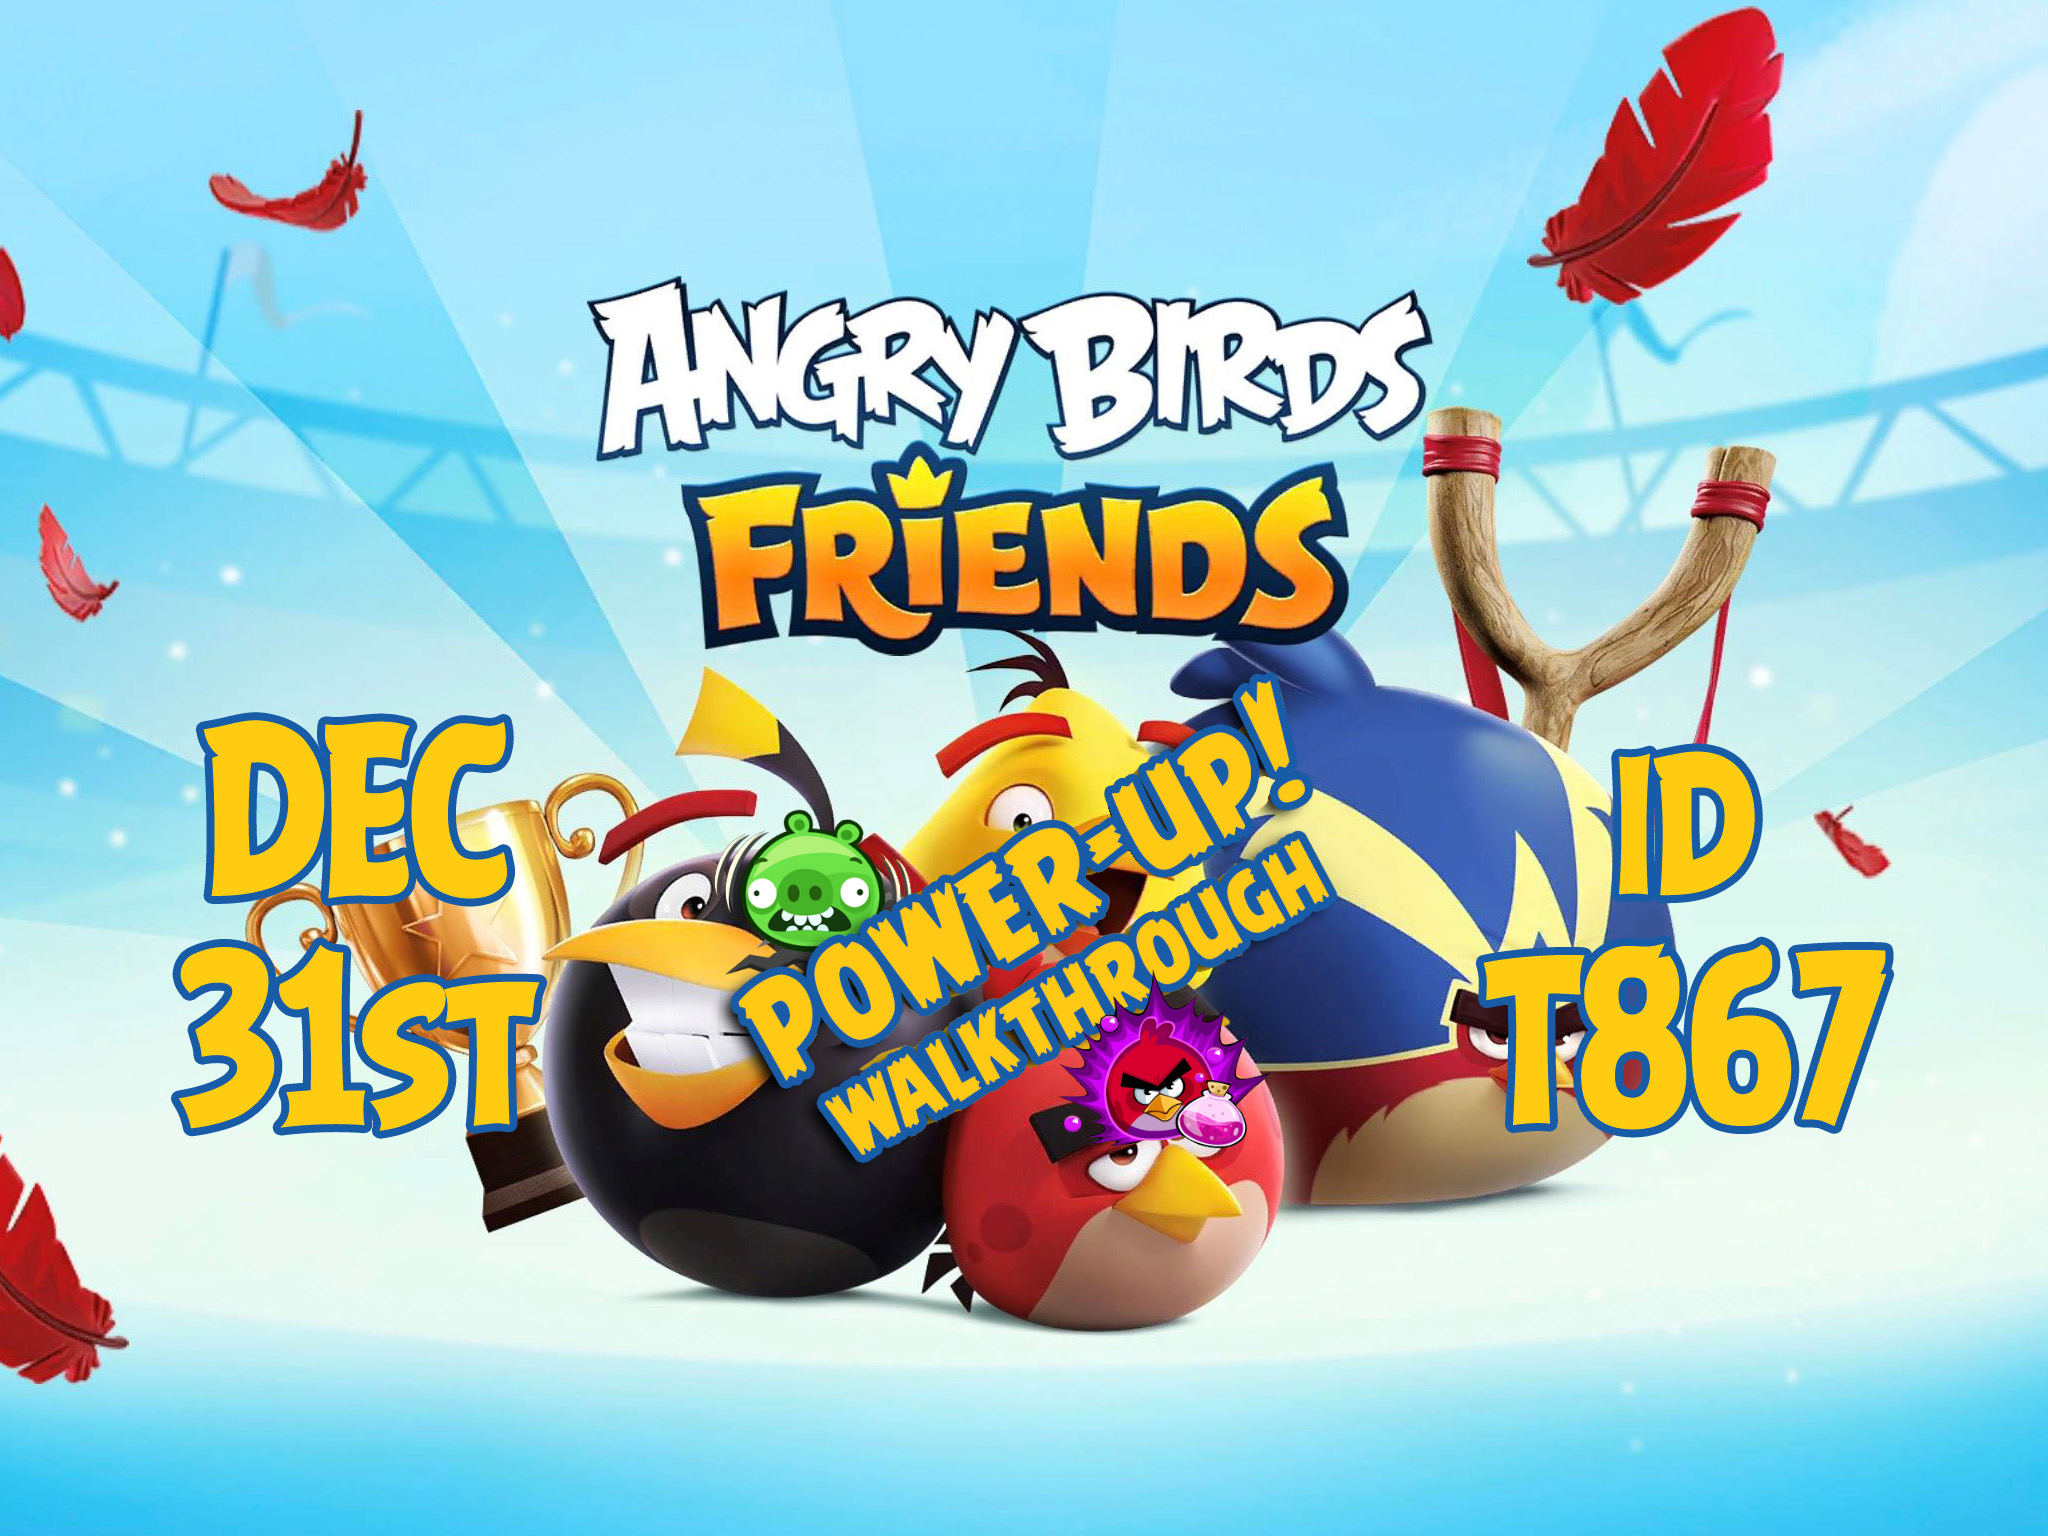 Angry-Birds-Friends-Tournament-T867-Feature-Image-PU